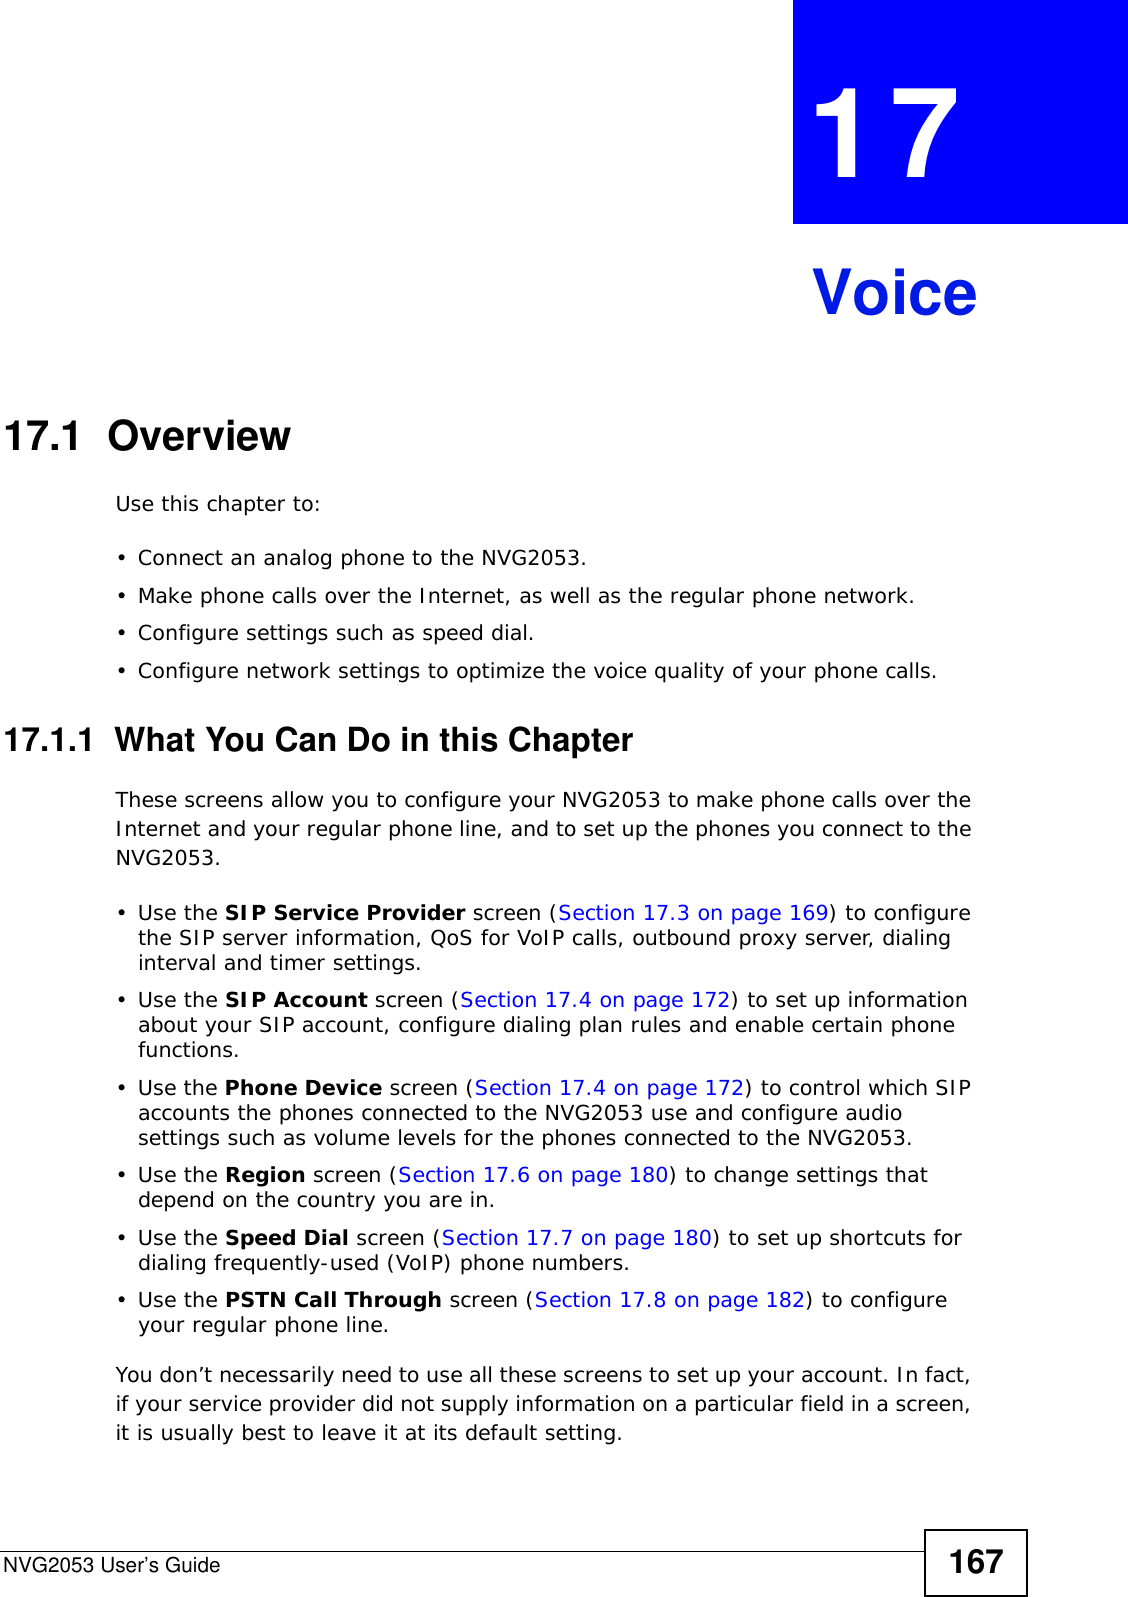 NVG2053 User’s Guide 167CHAPTER  17 Voice17.1  OverviewUse this chapter to:• Connect an analog phone to the NVG2053.• Make phone calls over the Internet, as well as the regular phone network.• Configure settings such as speed dial.• Configure network settings to optimize the voice quality of your phone calls.17.1.1  What You Can Do in this ChapterThese screens allow you to configure your NVG2053 to make phone calls over the Internet and your regular phone line, and to set up the phones you connect to the NVG2053.•Use the SIP Service Provider screen (Section 17.3 on page 169) to configure the SIP server information, QoS for VoIP calls, outbound proxy server, dialing interval and timer settings. •Use the SIP Account screen (Section 17.4 on page 172) to set up information about your SIP account, configure dialing plan rules and enable certain phone functions.•Use the Phone Device screen (Section 17.4 on page 172) to control which SIP accounts the phones connected to the NVG2053 use and configure audio settings such as volume levels for the phones connected to the NVG2053.•Use the Region screen (Section 17.6 on page 180) to change settings that depend on the country you are in.•Use the Speed Dial screen (Section 17.7 on page 180) to set up shortcuts for dialing frequently-used (VoIP) phone numbers.•Use the PSTN Call Through screen (Section 17.8 on page 182) to configure your regular phone line.You don’t necessarily need to use all these screens to set up your account. In fact, if your service provider did not supply information on a particular field in a screen, it is usually best to leave it at its default setting.